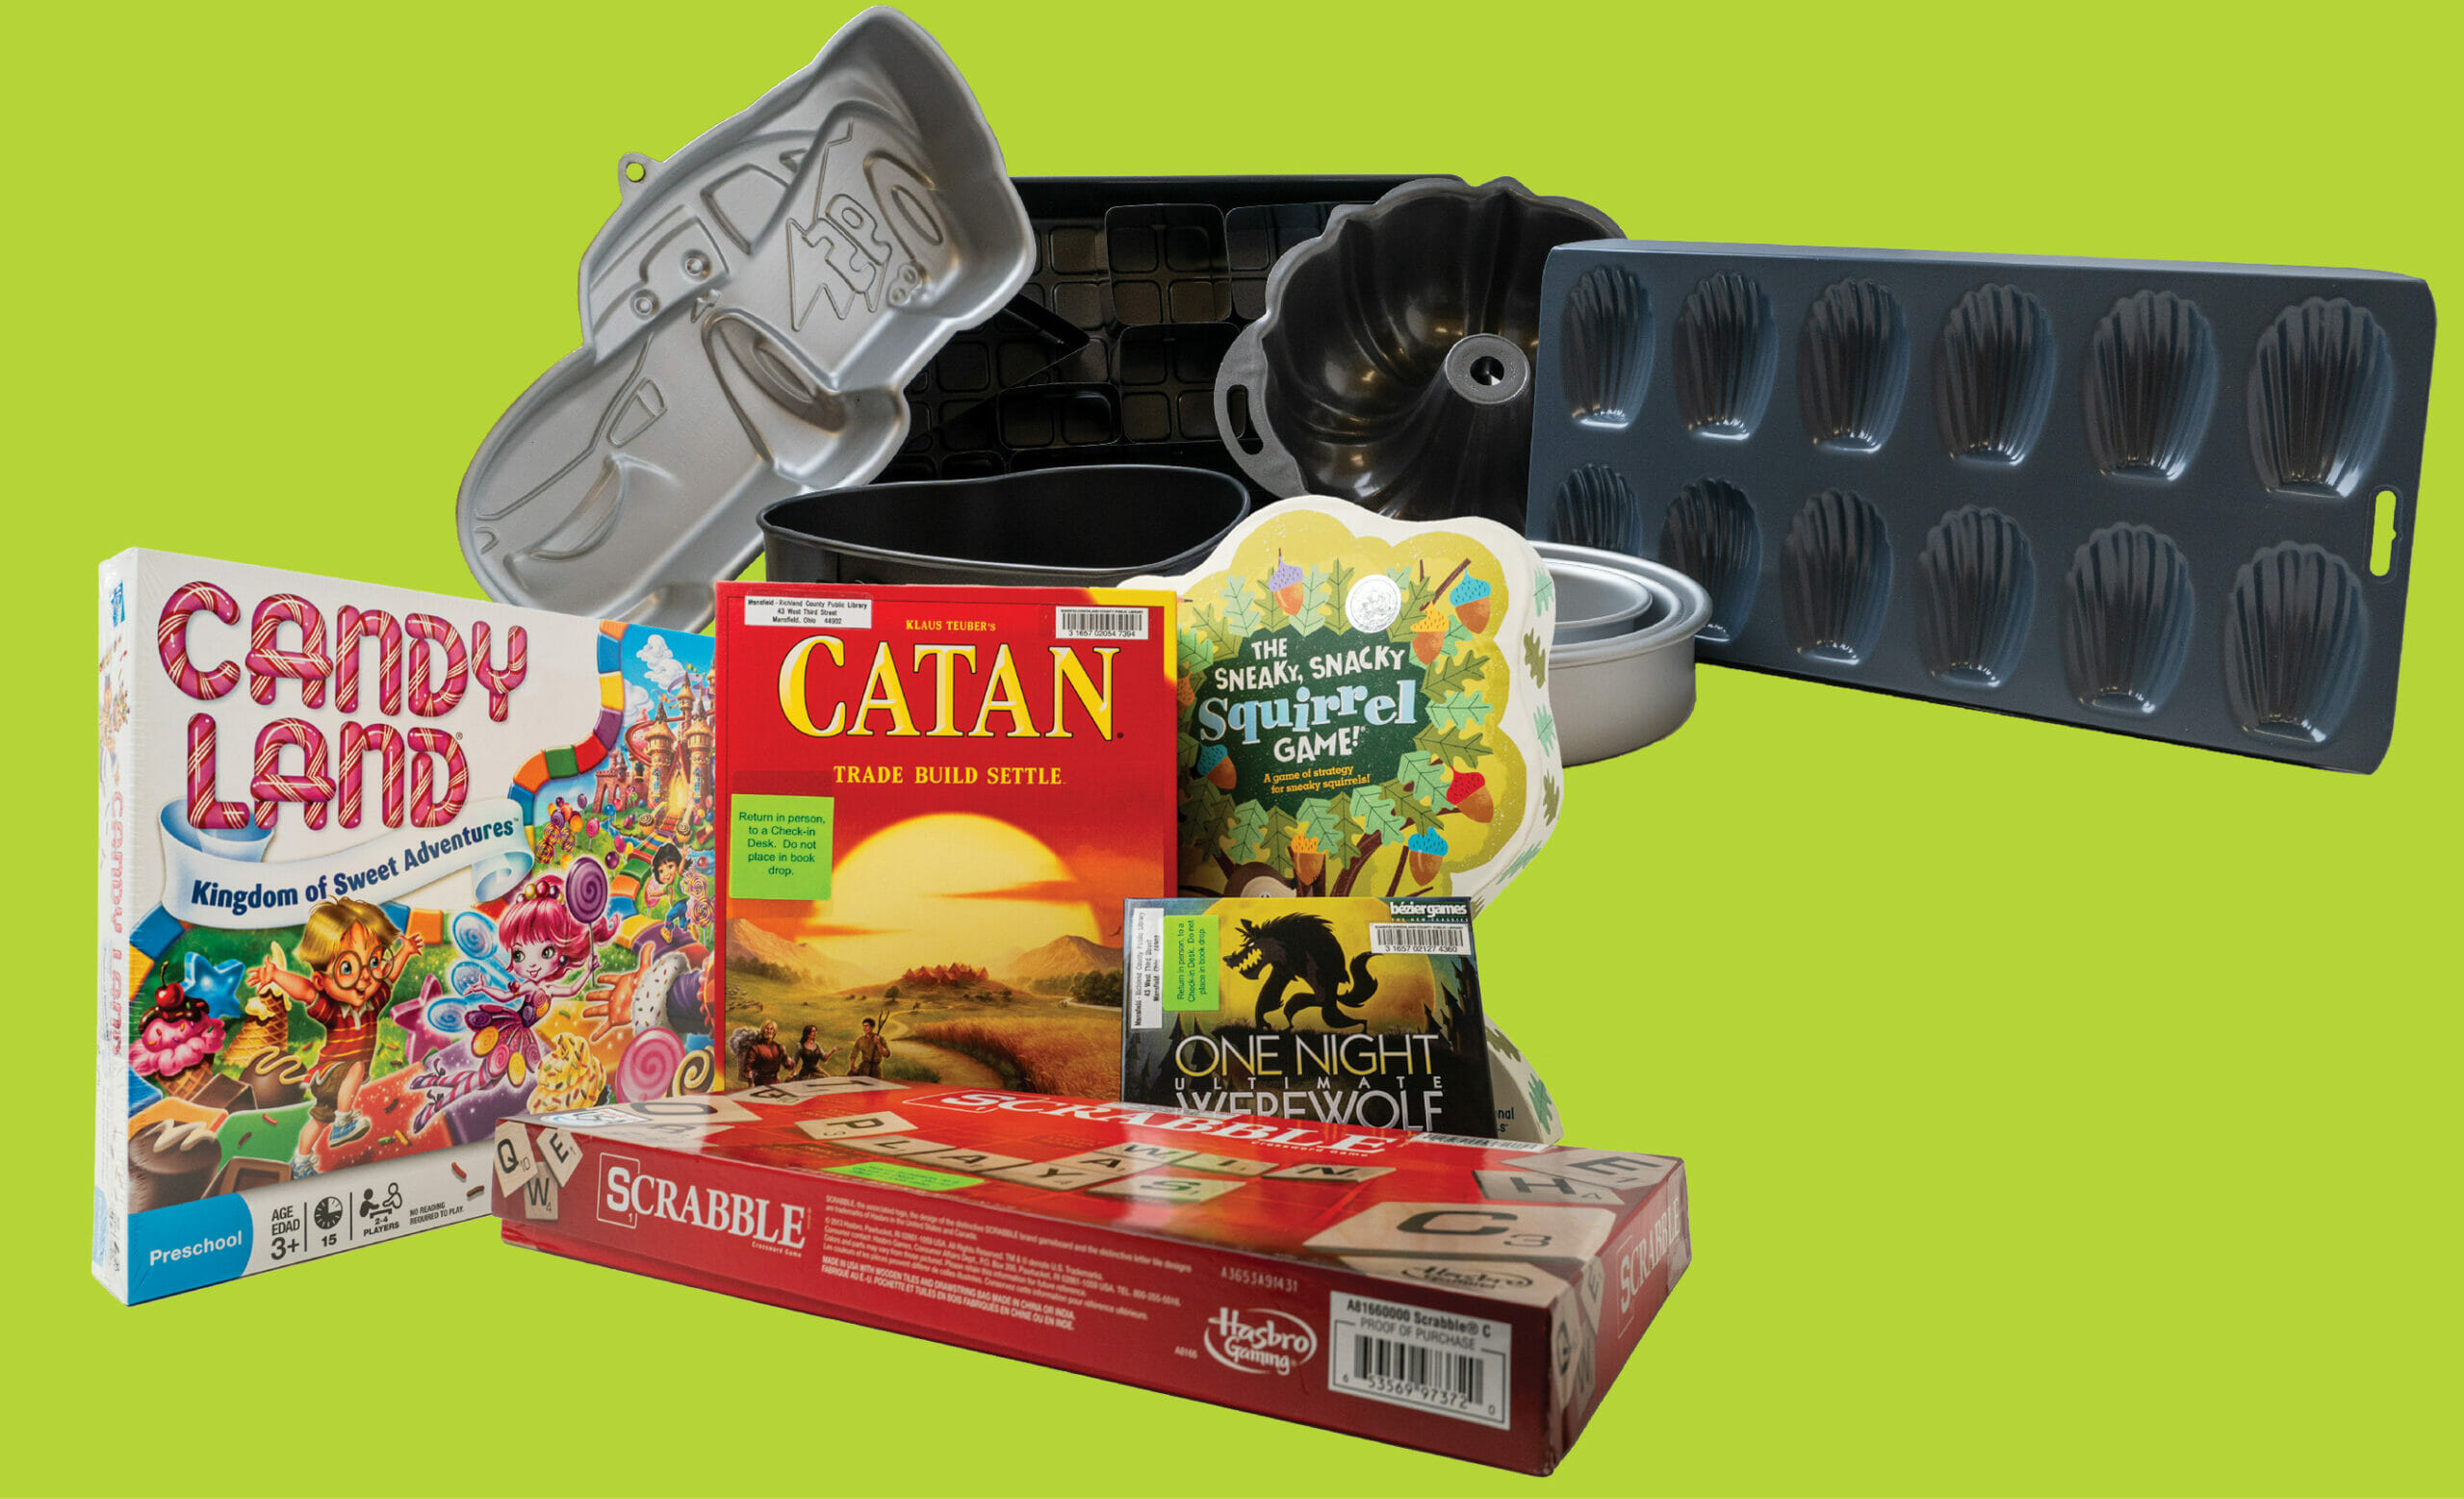 Have some fun while you learn by borrowing one of our many board games or cake pans!